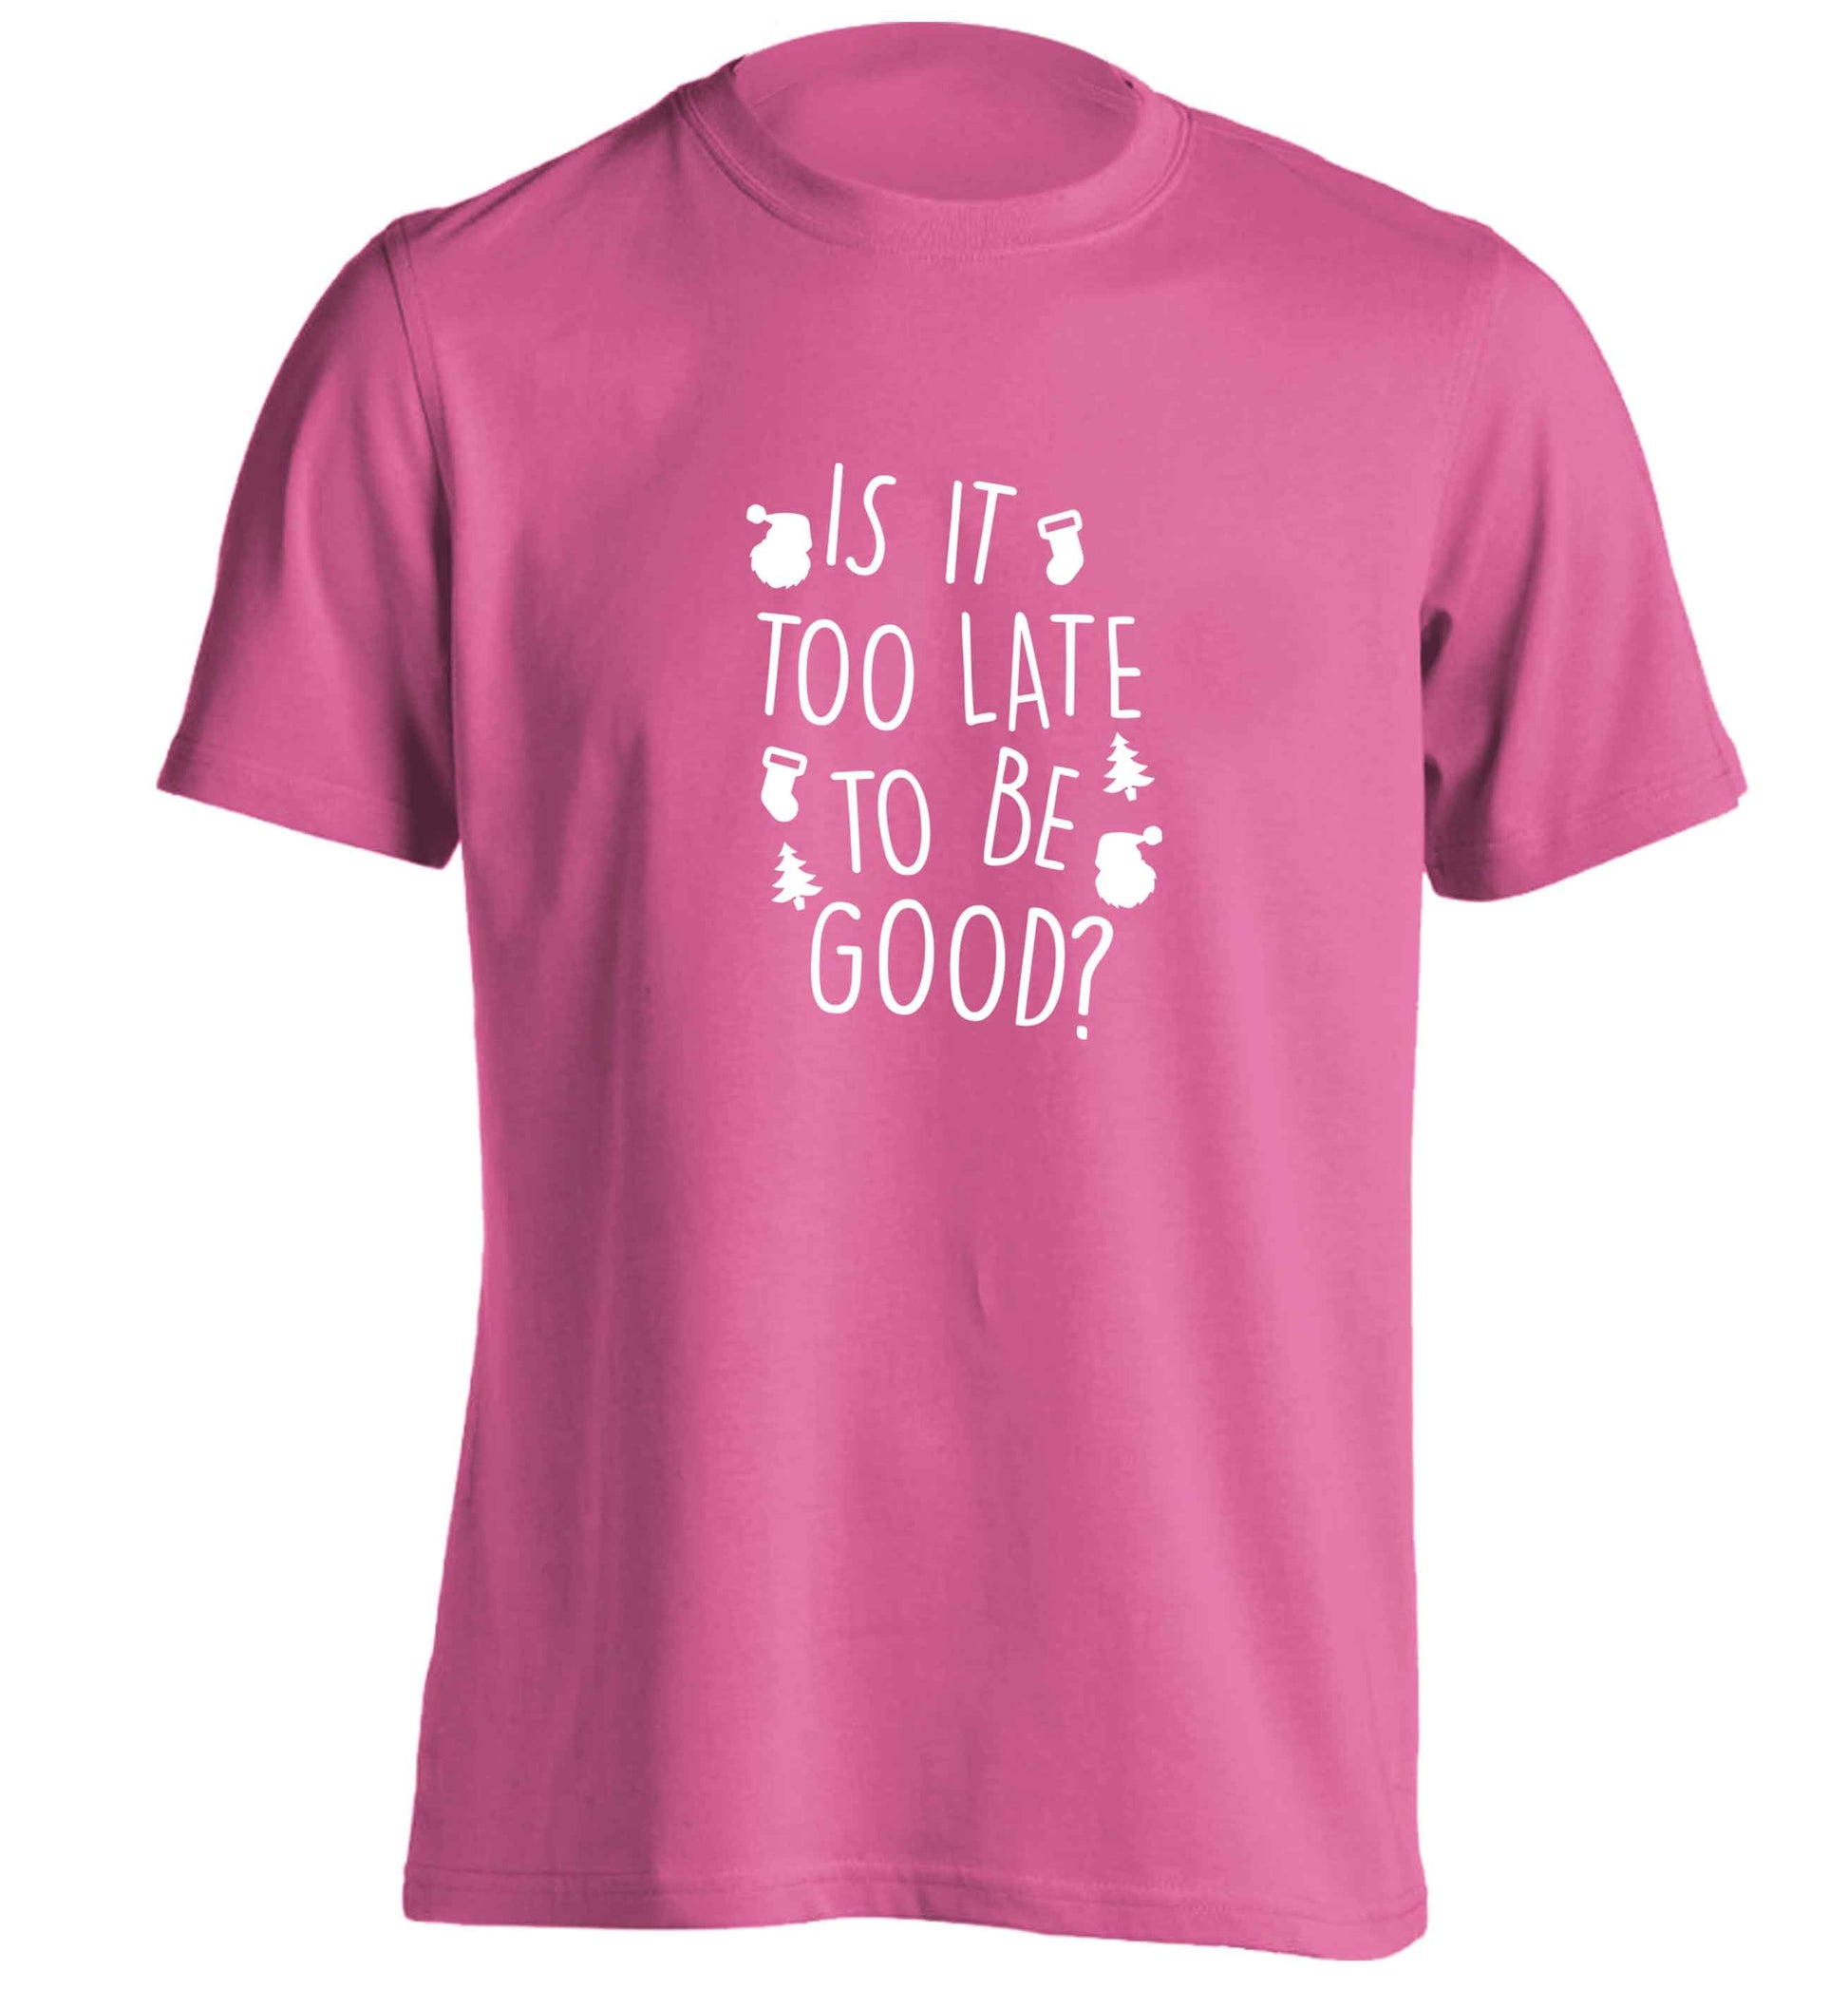 Too Late to be Good adults unisex pink Tshirt 2XL